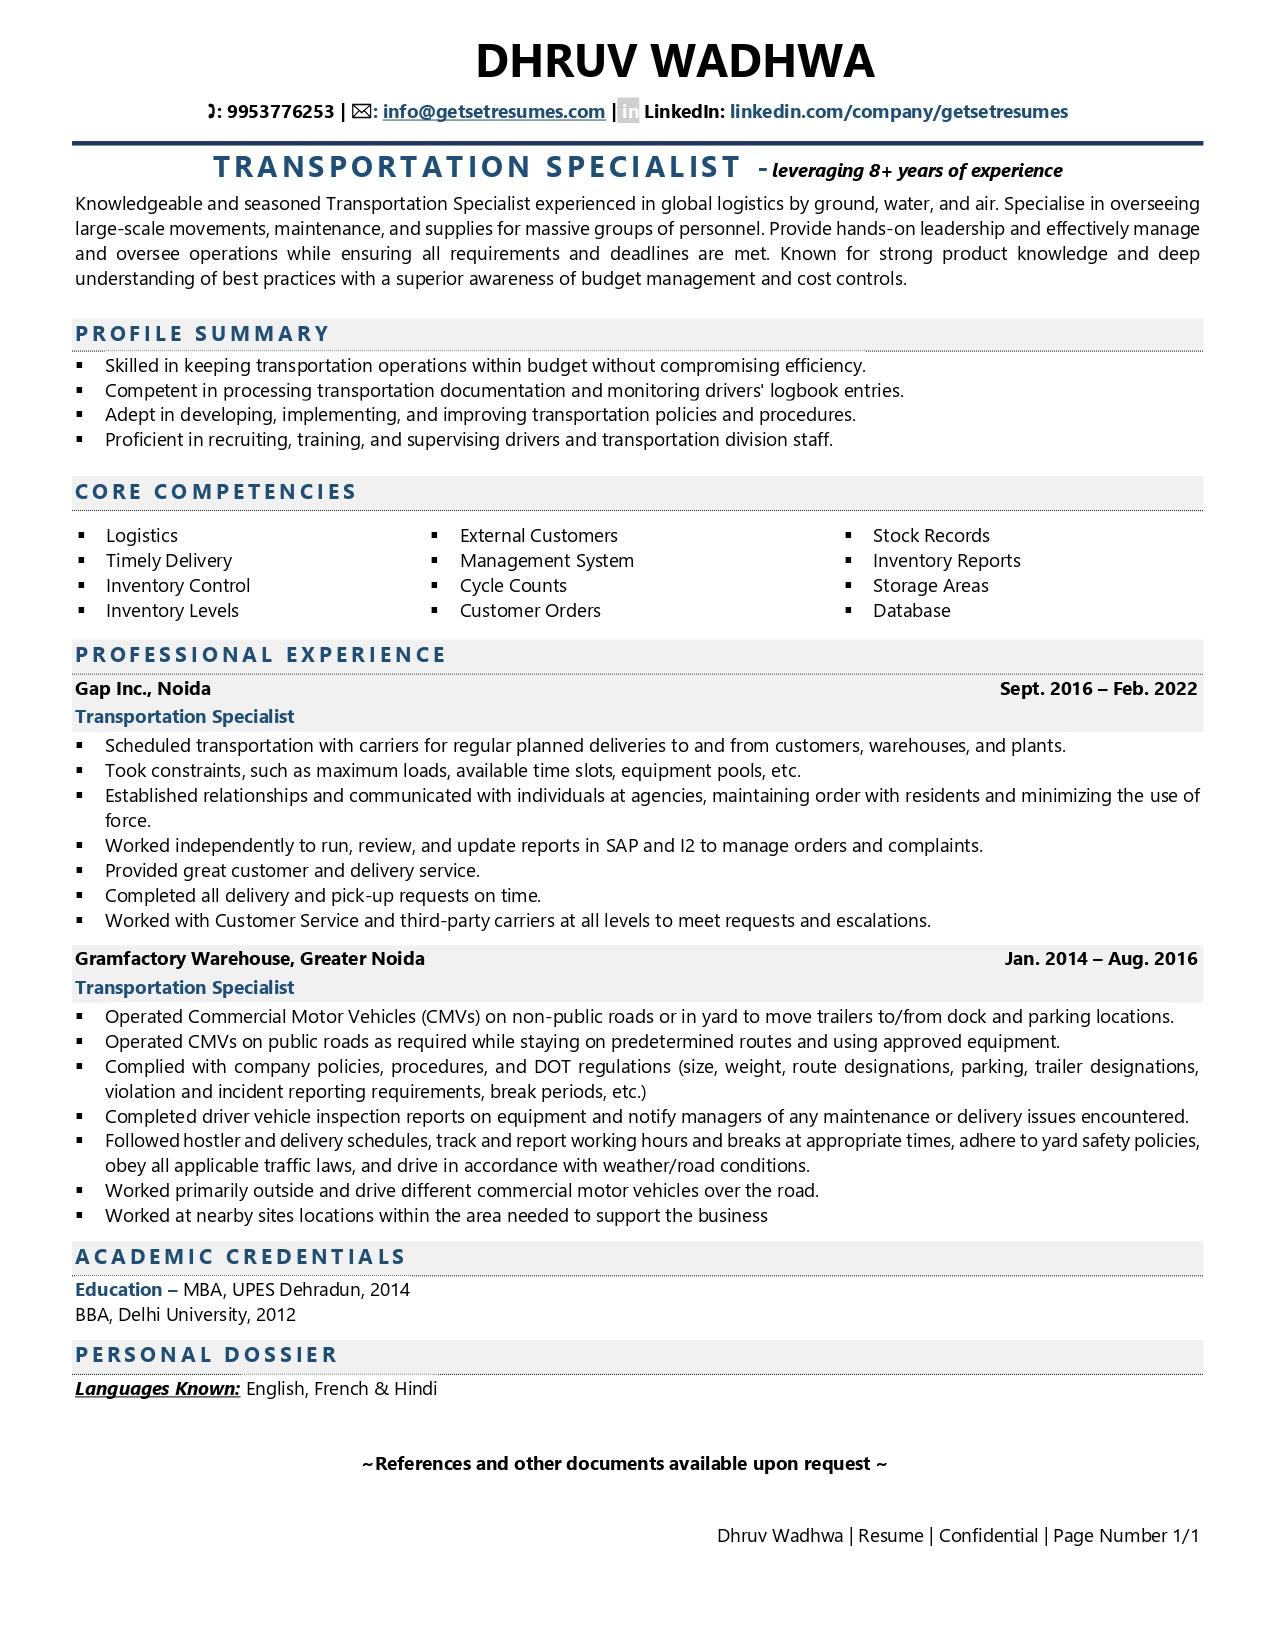 Transportation Specialist - Resume Example & Template